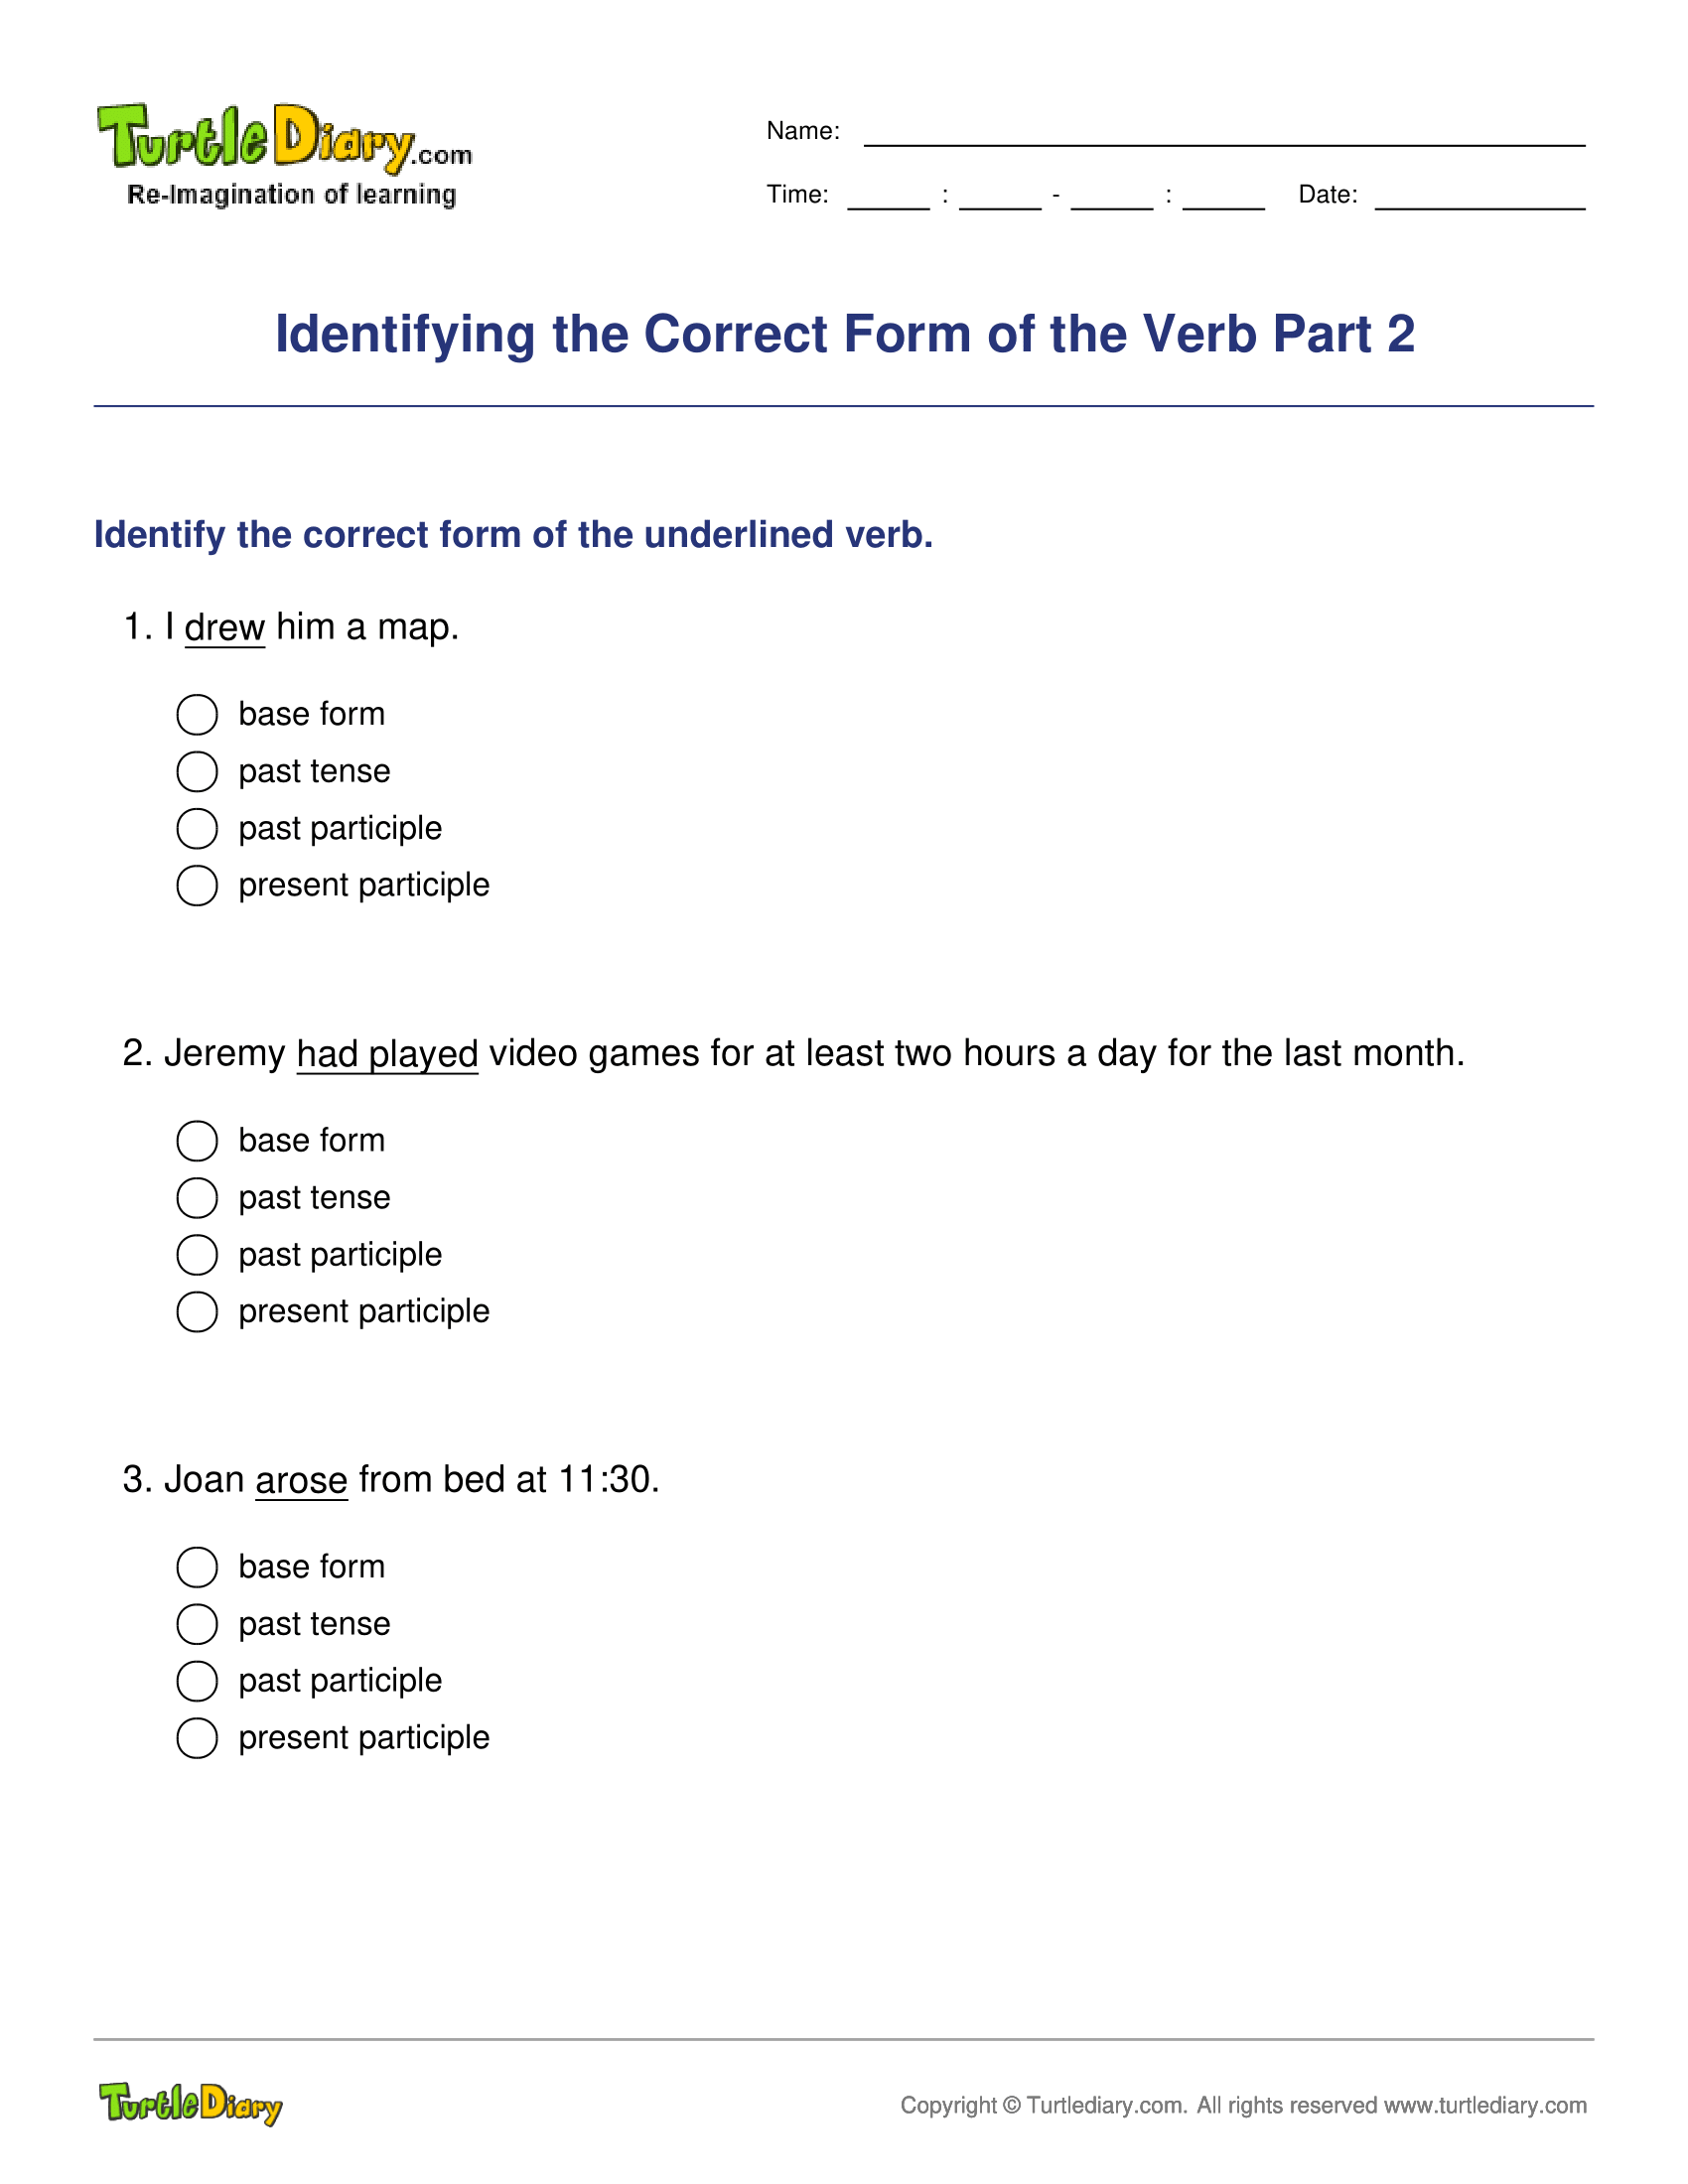 Identifying the Correct Form of the Verb Part 2